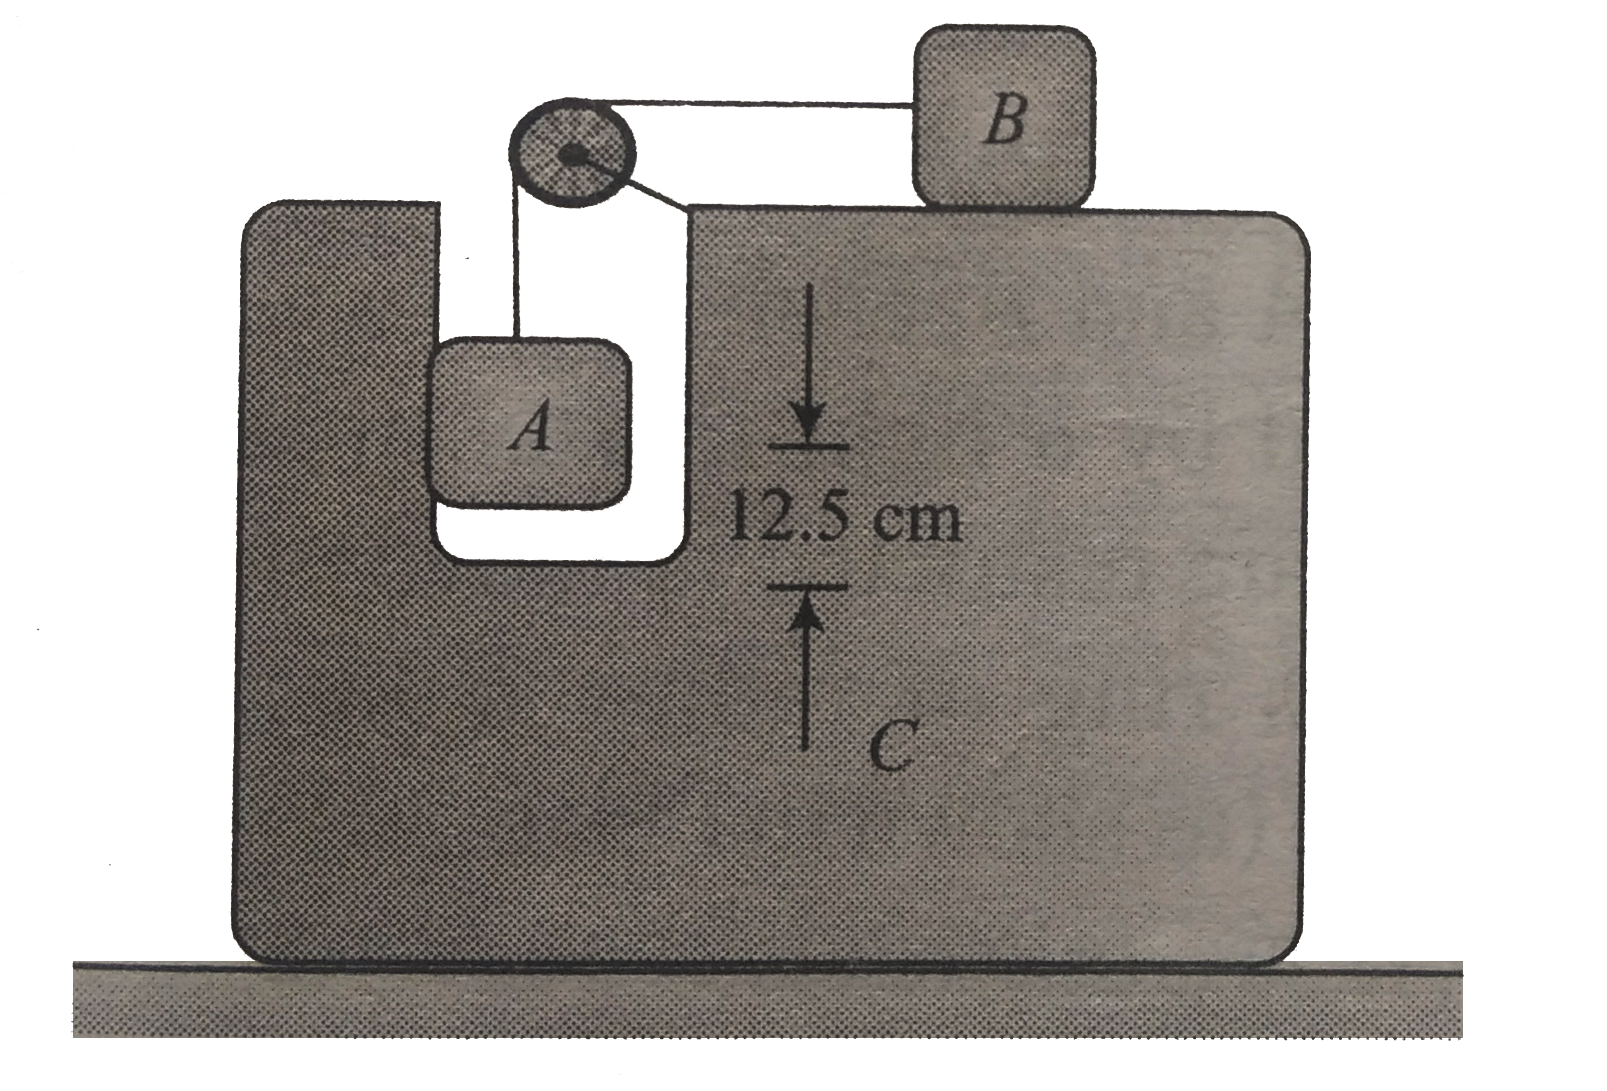 A small, light pulley is attached with a block C of mass 4 kg as shown in fig. Block B of mass 1.5 kg is placed on the top horizontal surface of C. Another block A of mass 2 kg is hanging from a string, attached with B and passing over the pulley. Taking g=10ms^(-2) and neglecting friction, calculate the acceleration of each block when the system is released from rest.